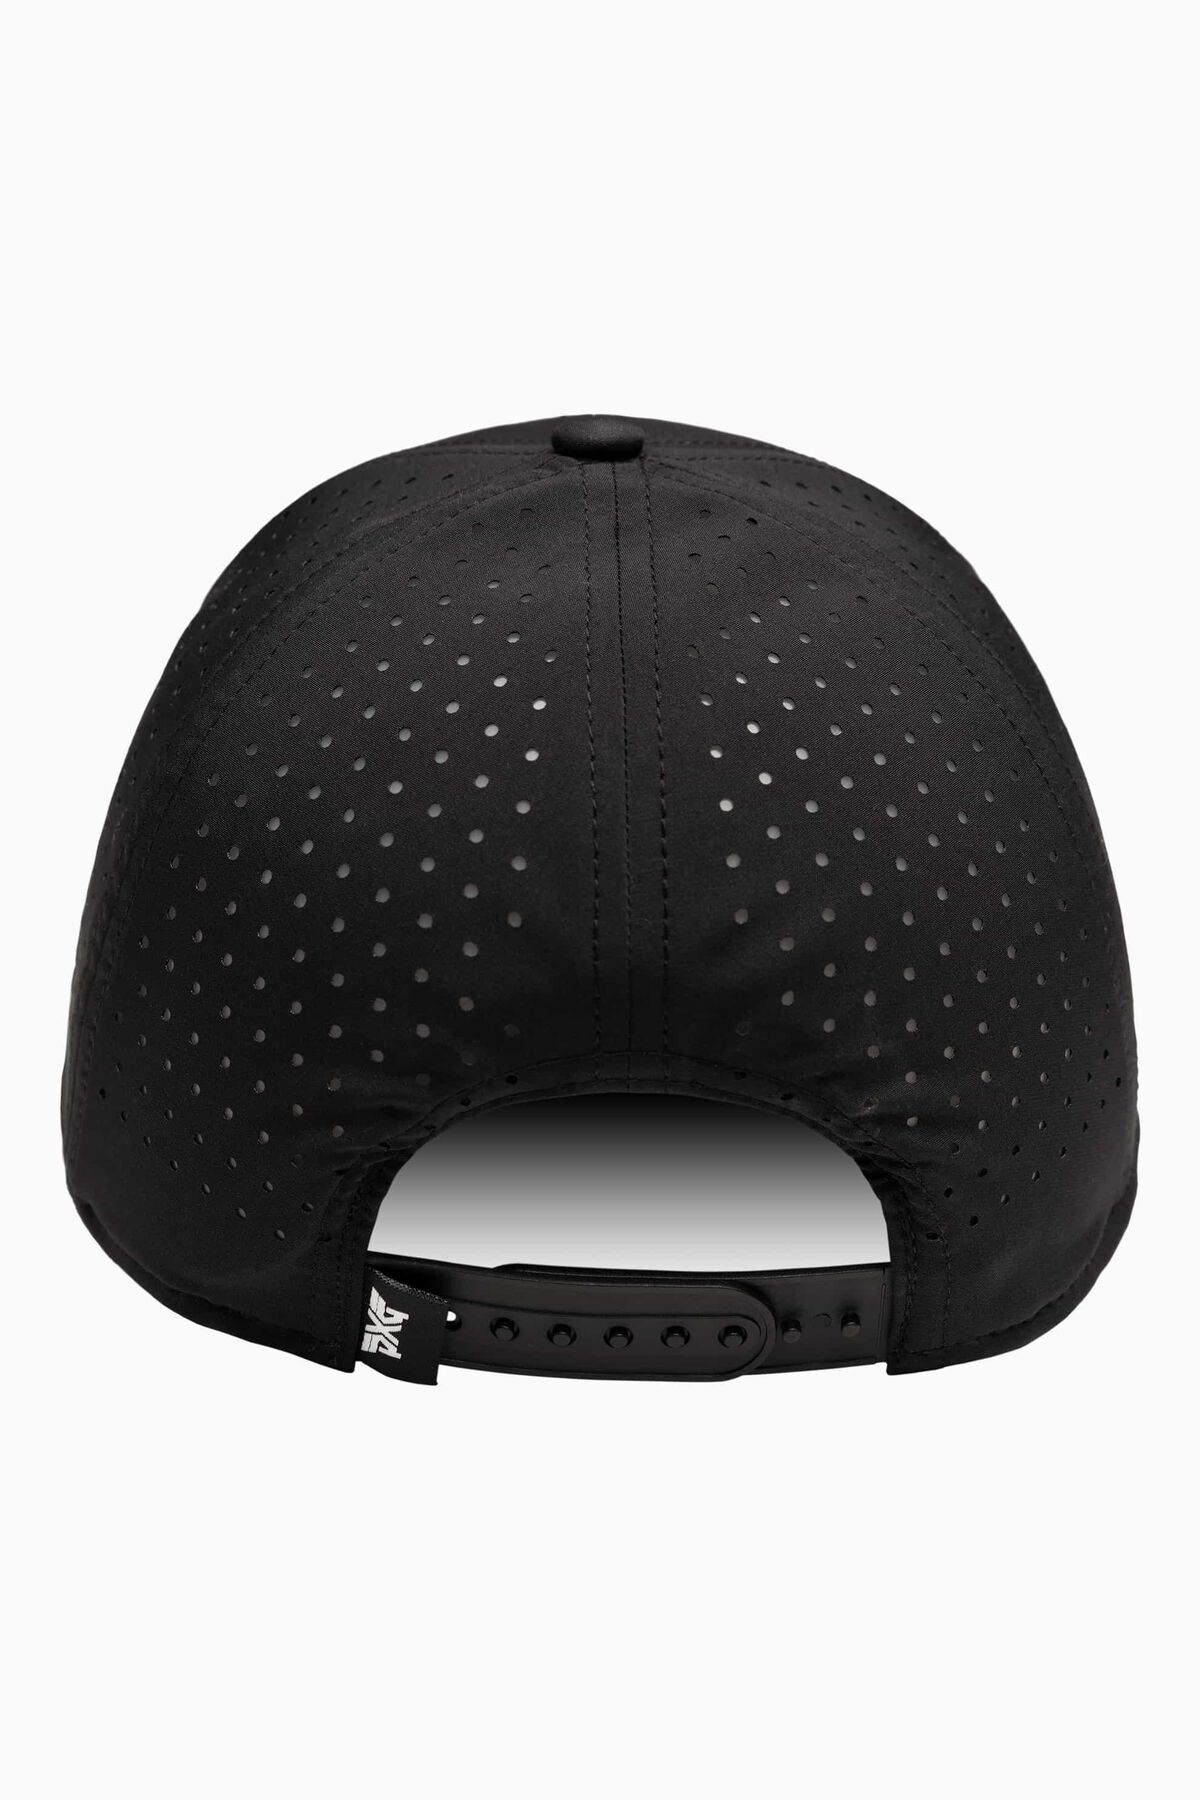 Buy Faceted Large 6 Panel Structured Curved Bill Cap | PXG